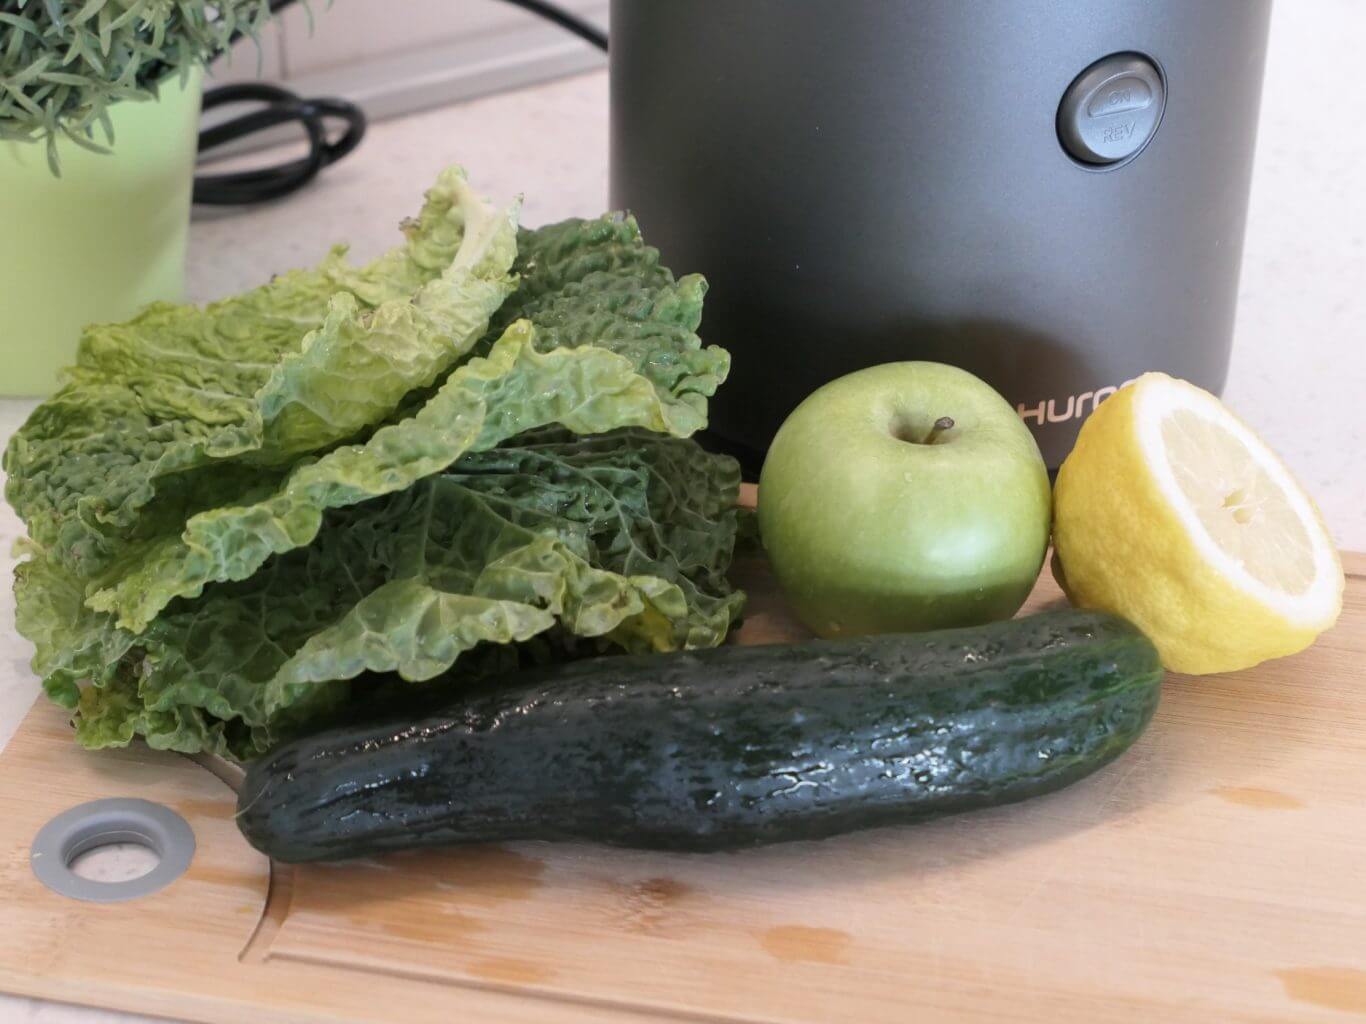 Kale, Cucumber, Lemon and apple in front of Hurom H320N slow juicer which is really similar to the Nama J2